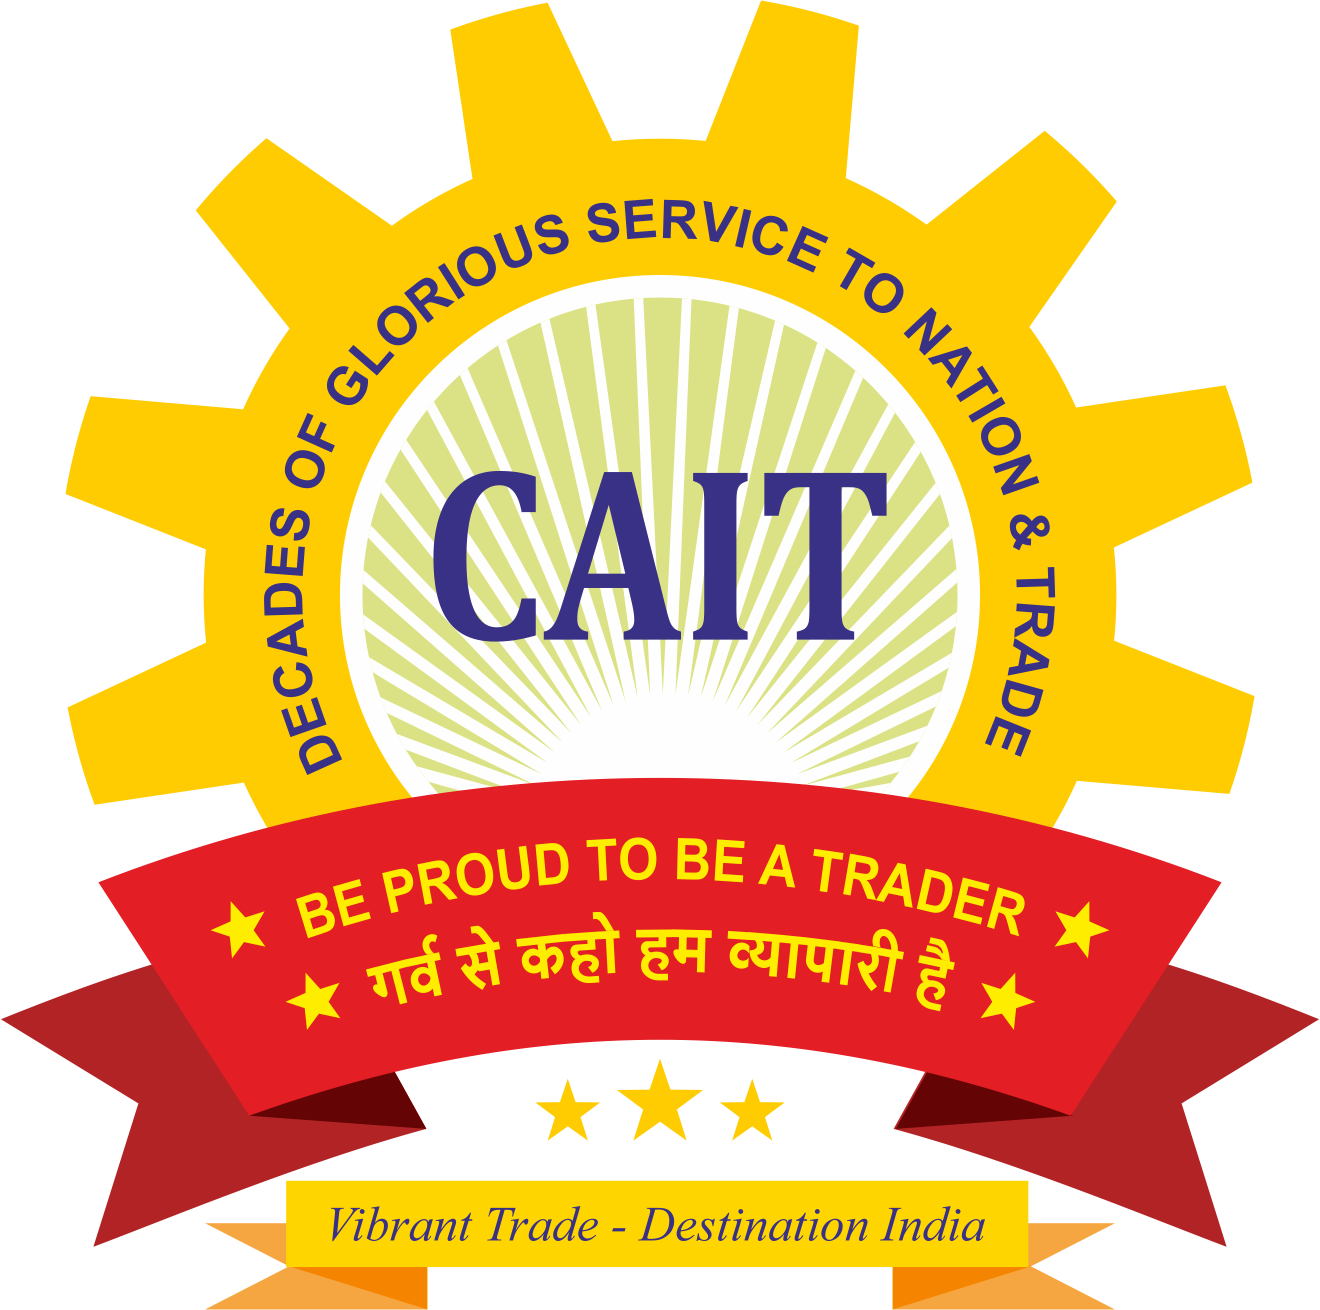 CAIT | The Confederation of All India Traders